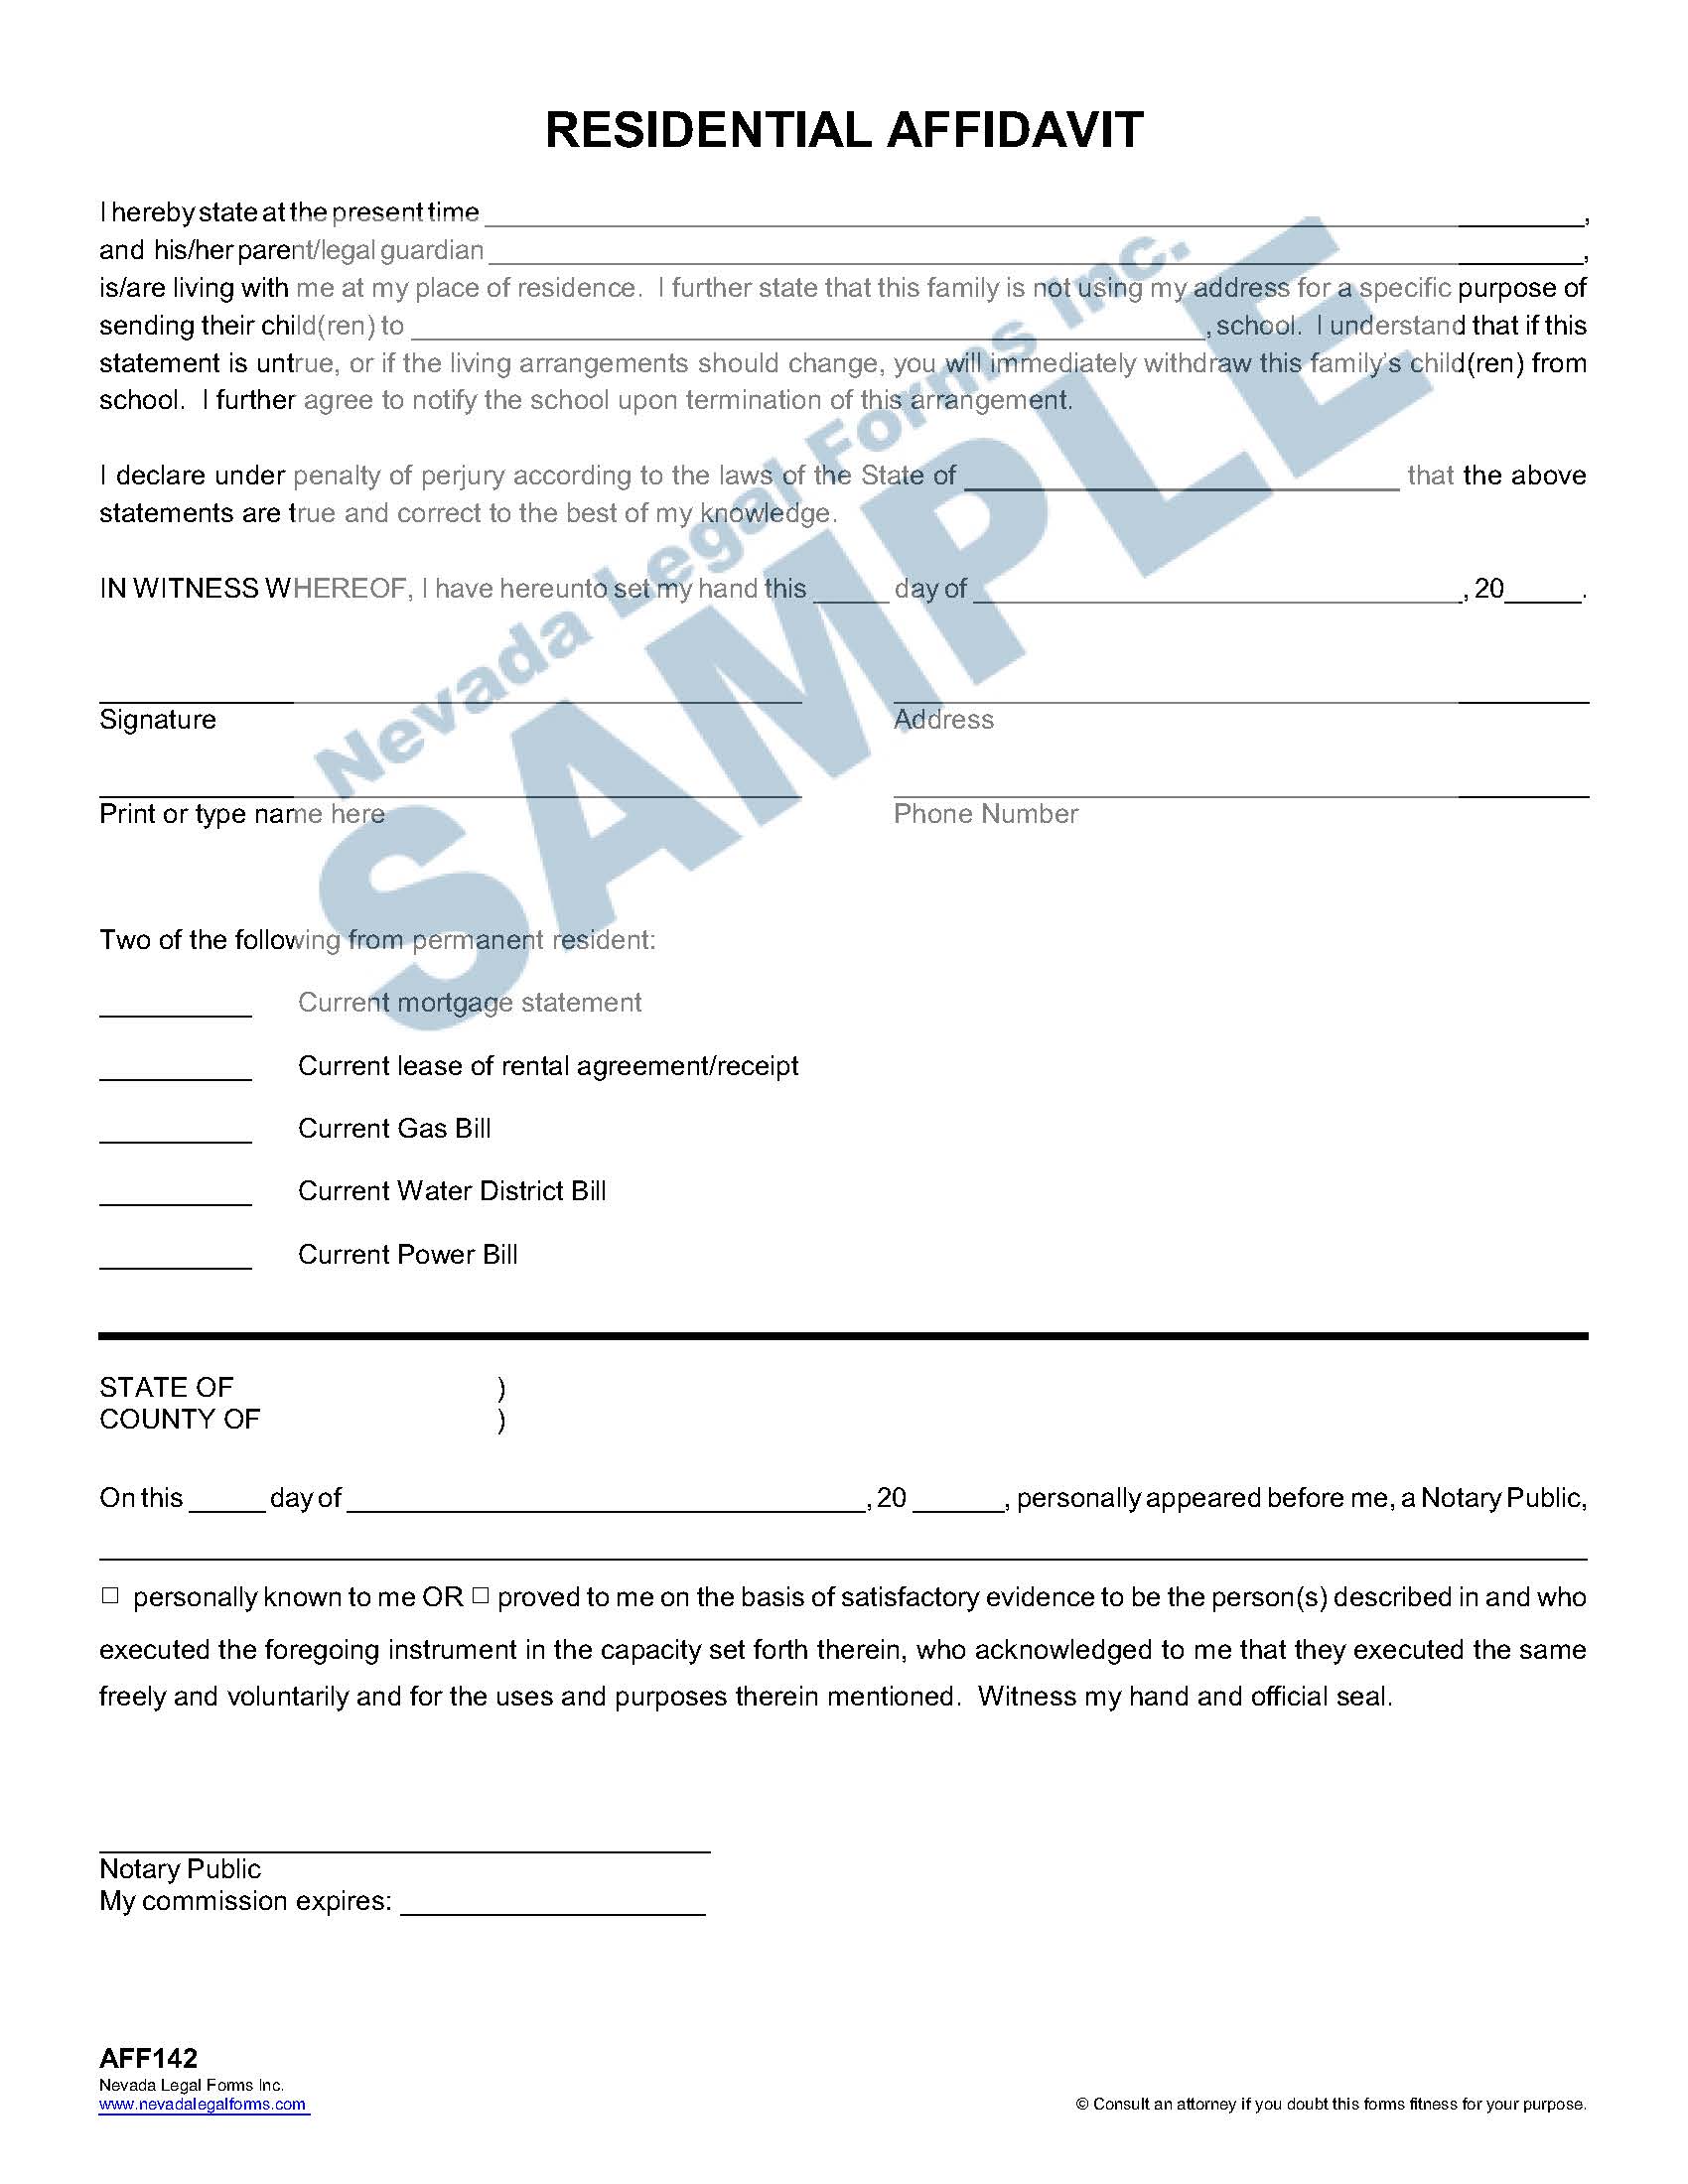 Residential Affidavit Nevada Legal Forms Services